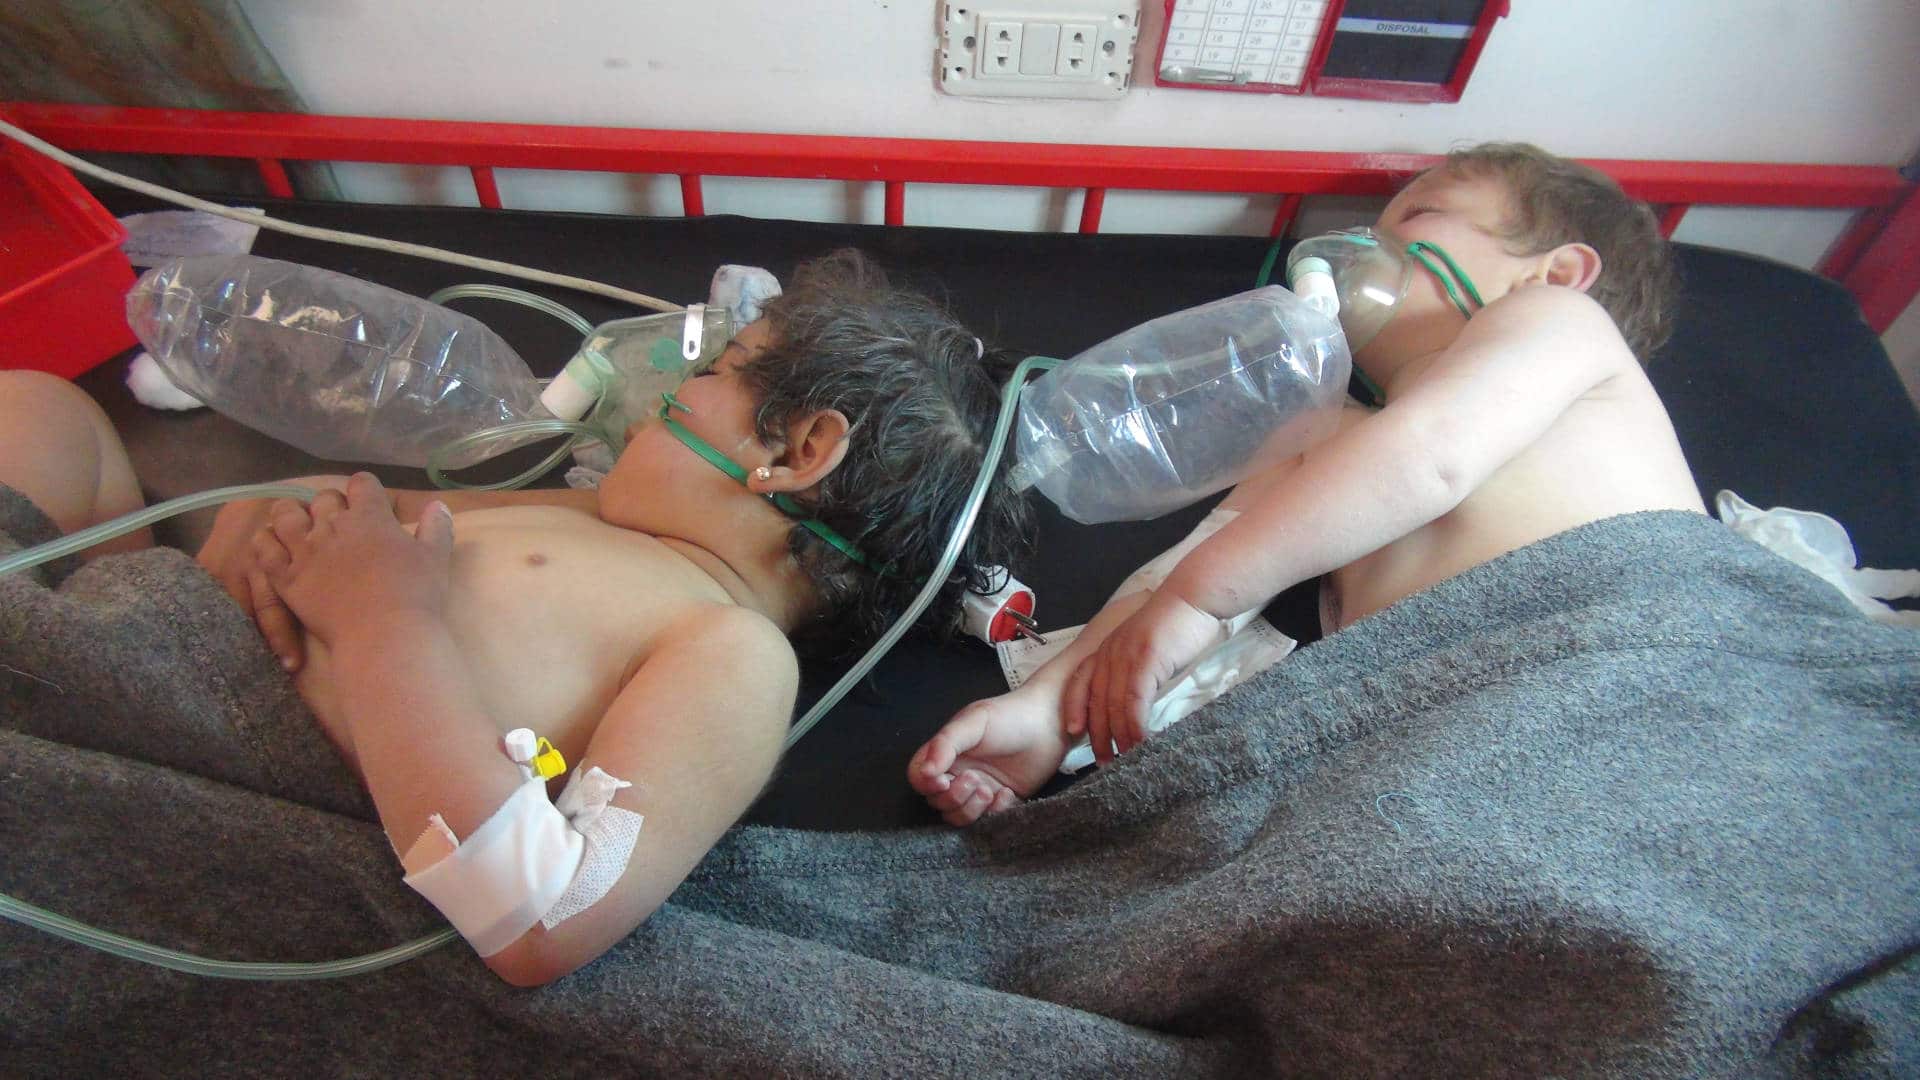 Children get treatment at a hospital after a chemical weapons attack on the village of Khan Sheikhoun, Syria, on April 4, 2017. Who was responsible for the attack remains a subject of heated debate.